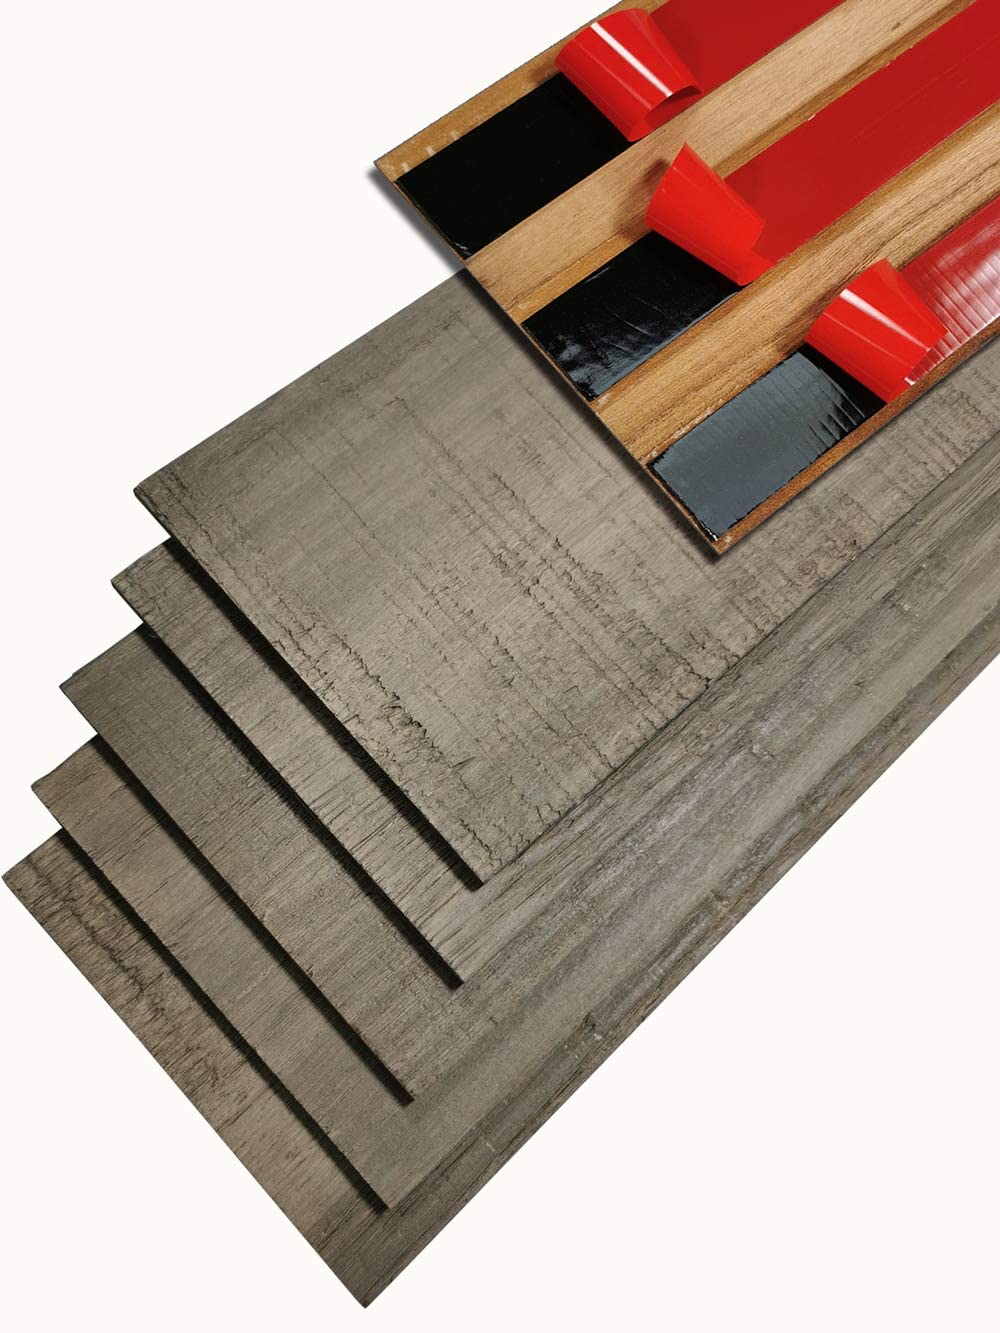 A15505f -Reclaimed Wood Panel Distressed Wood Grain in Gray, Self